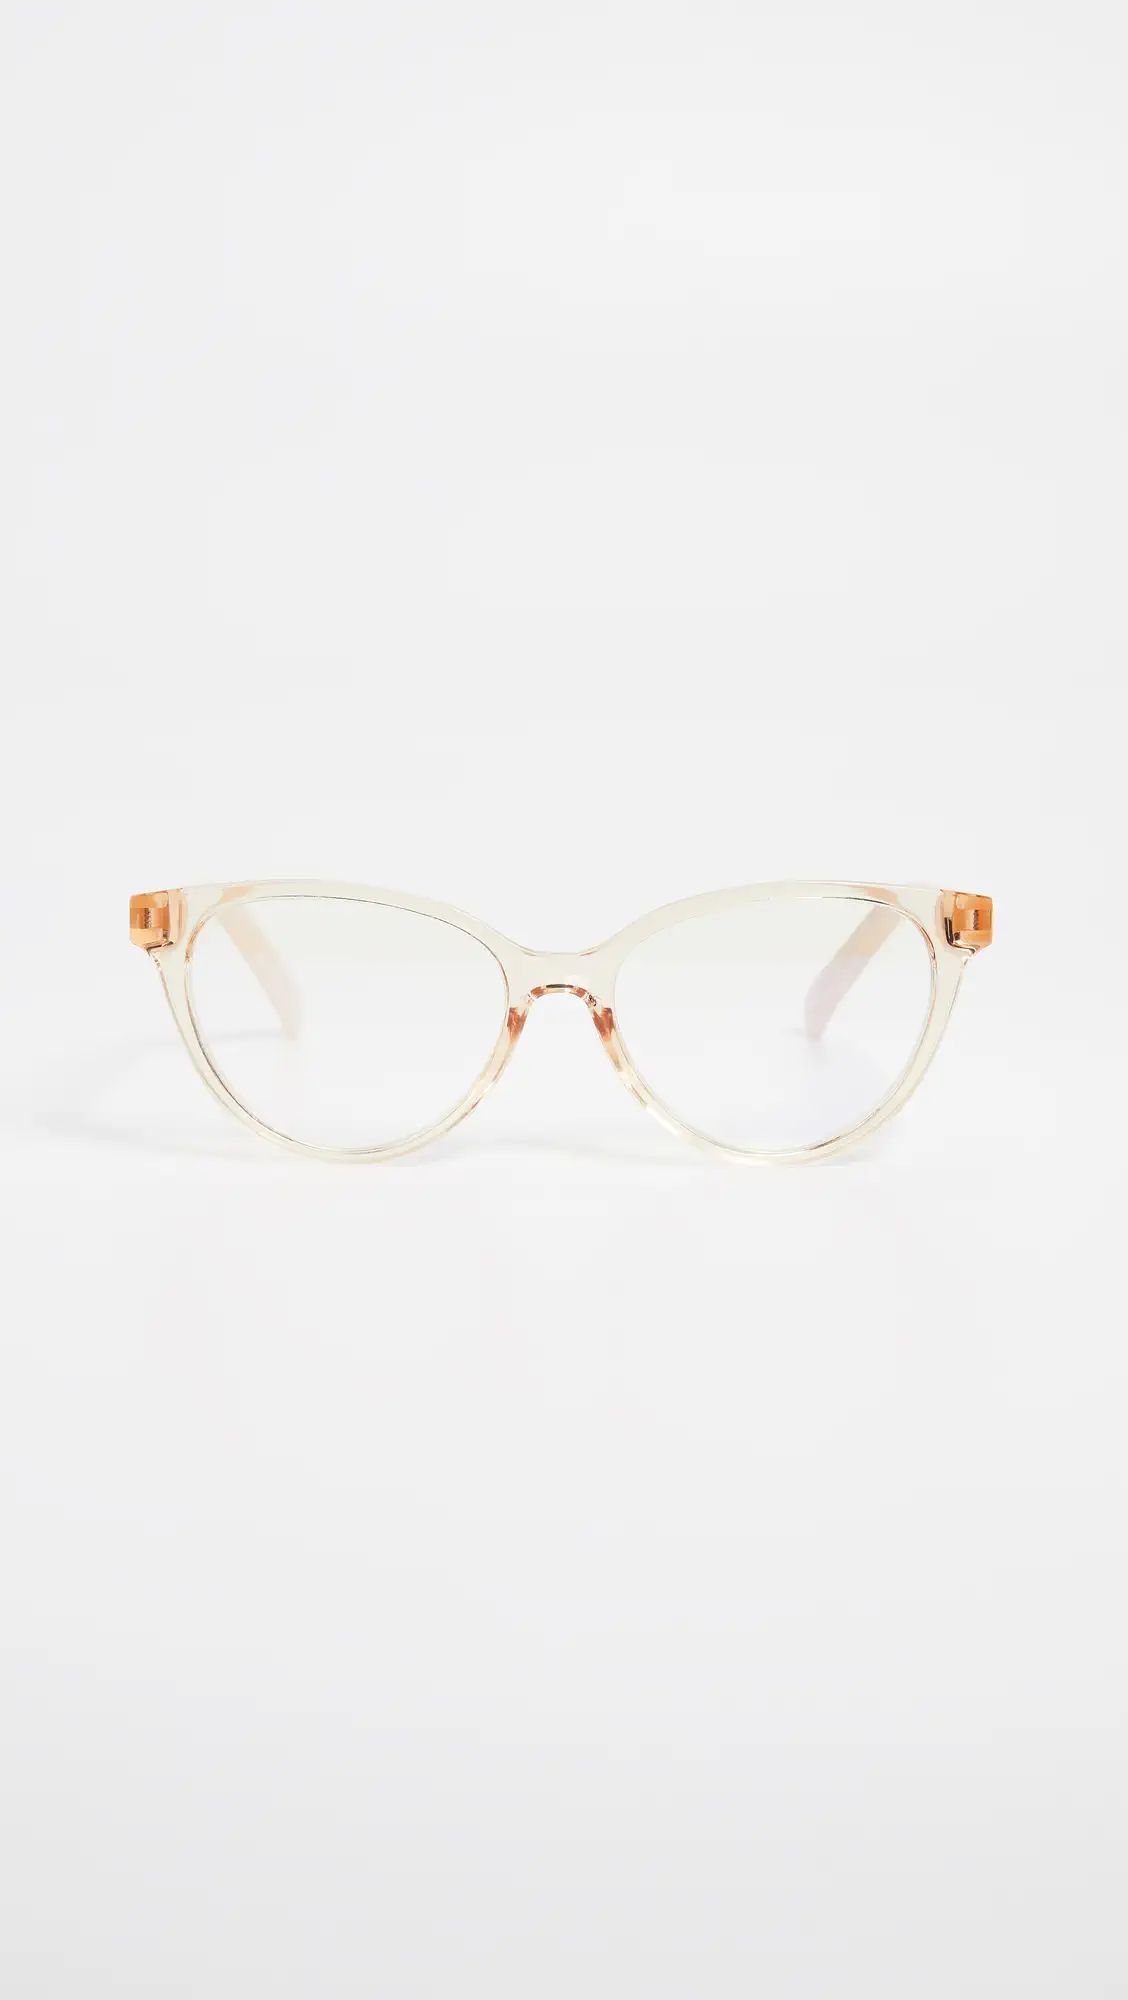 The Book Club Blue Light The Art Of Snore Glasses | Shopbop | Shopbop